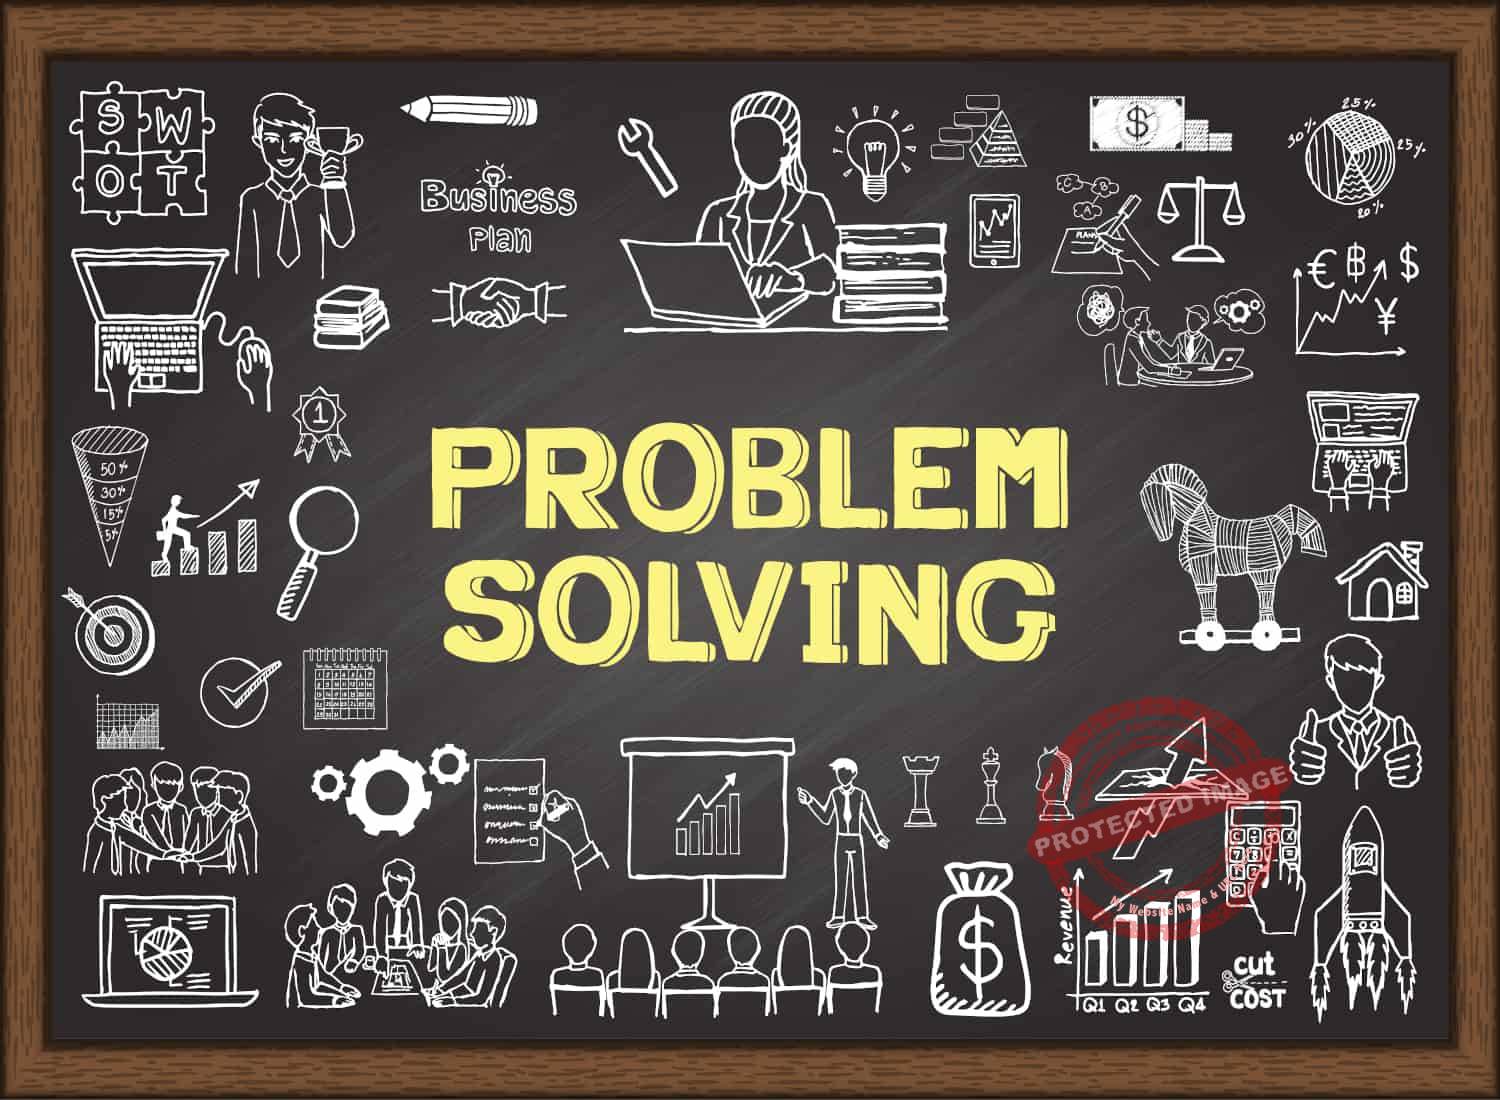 why are problem solving and decision making skills essential to an entrepreneur